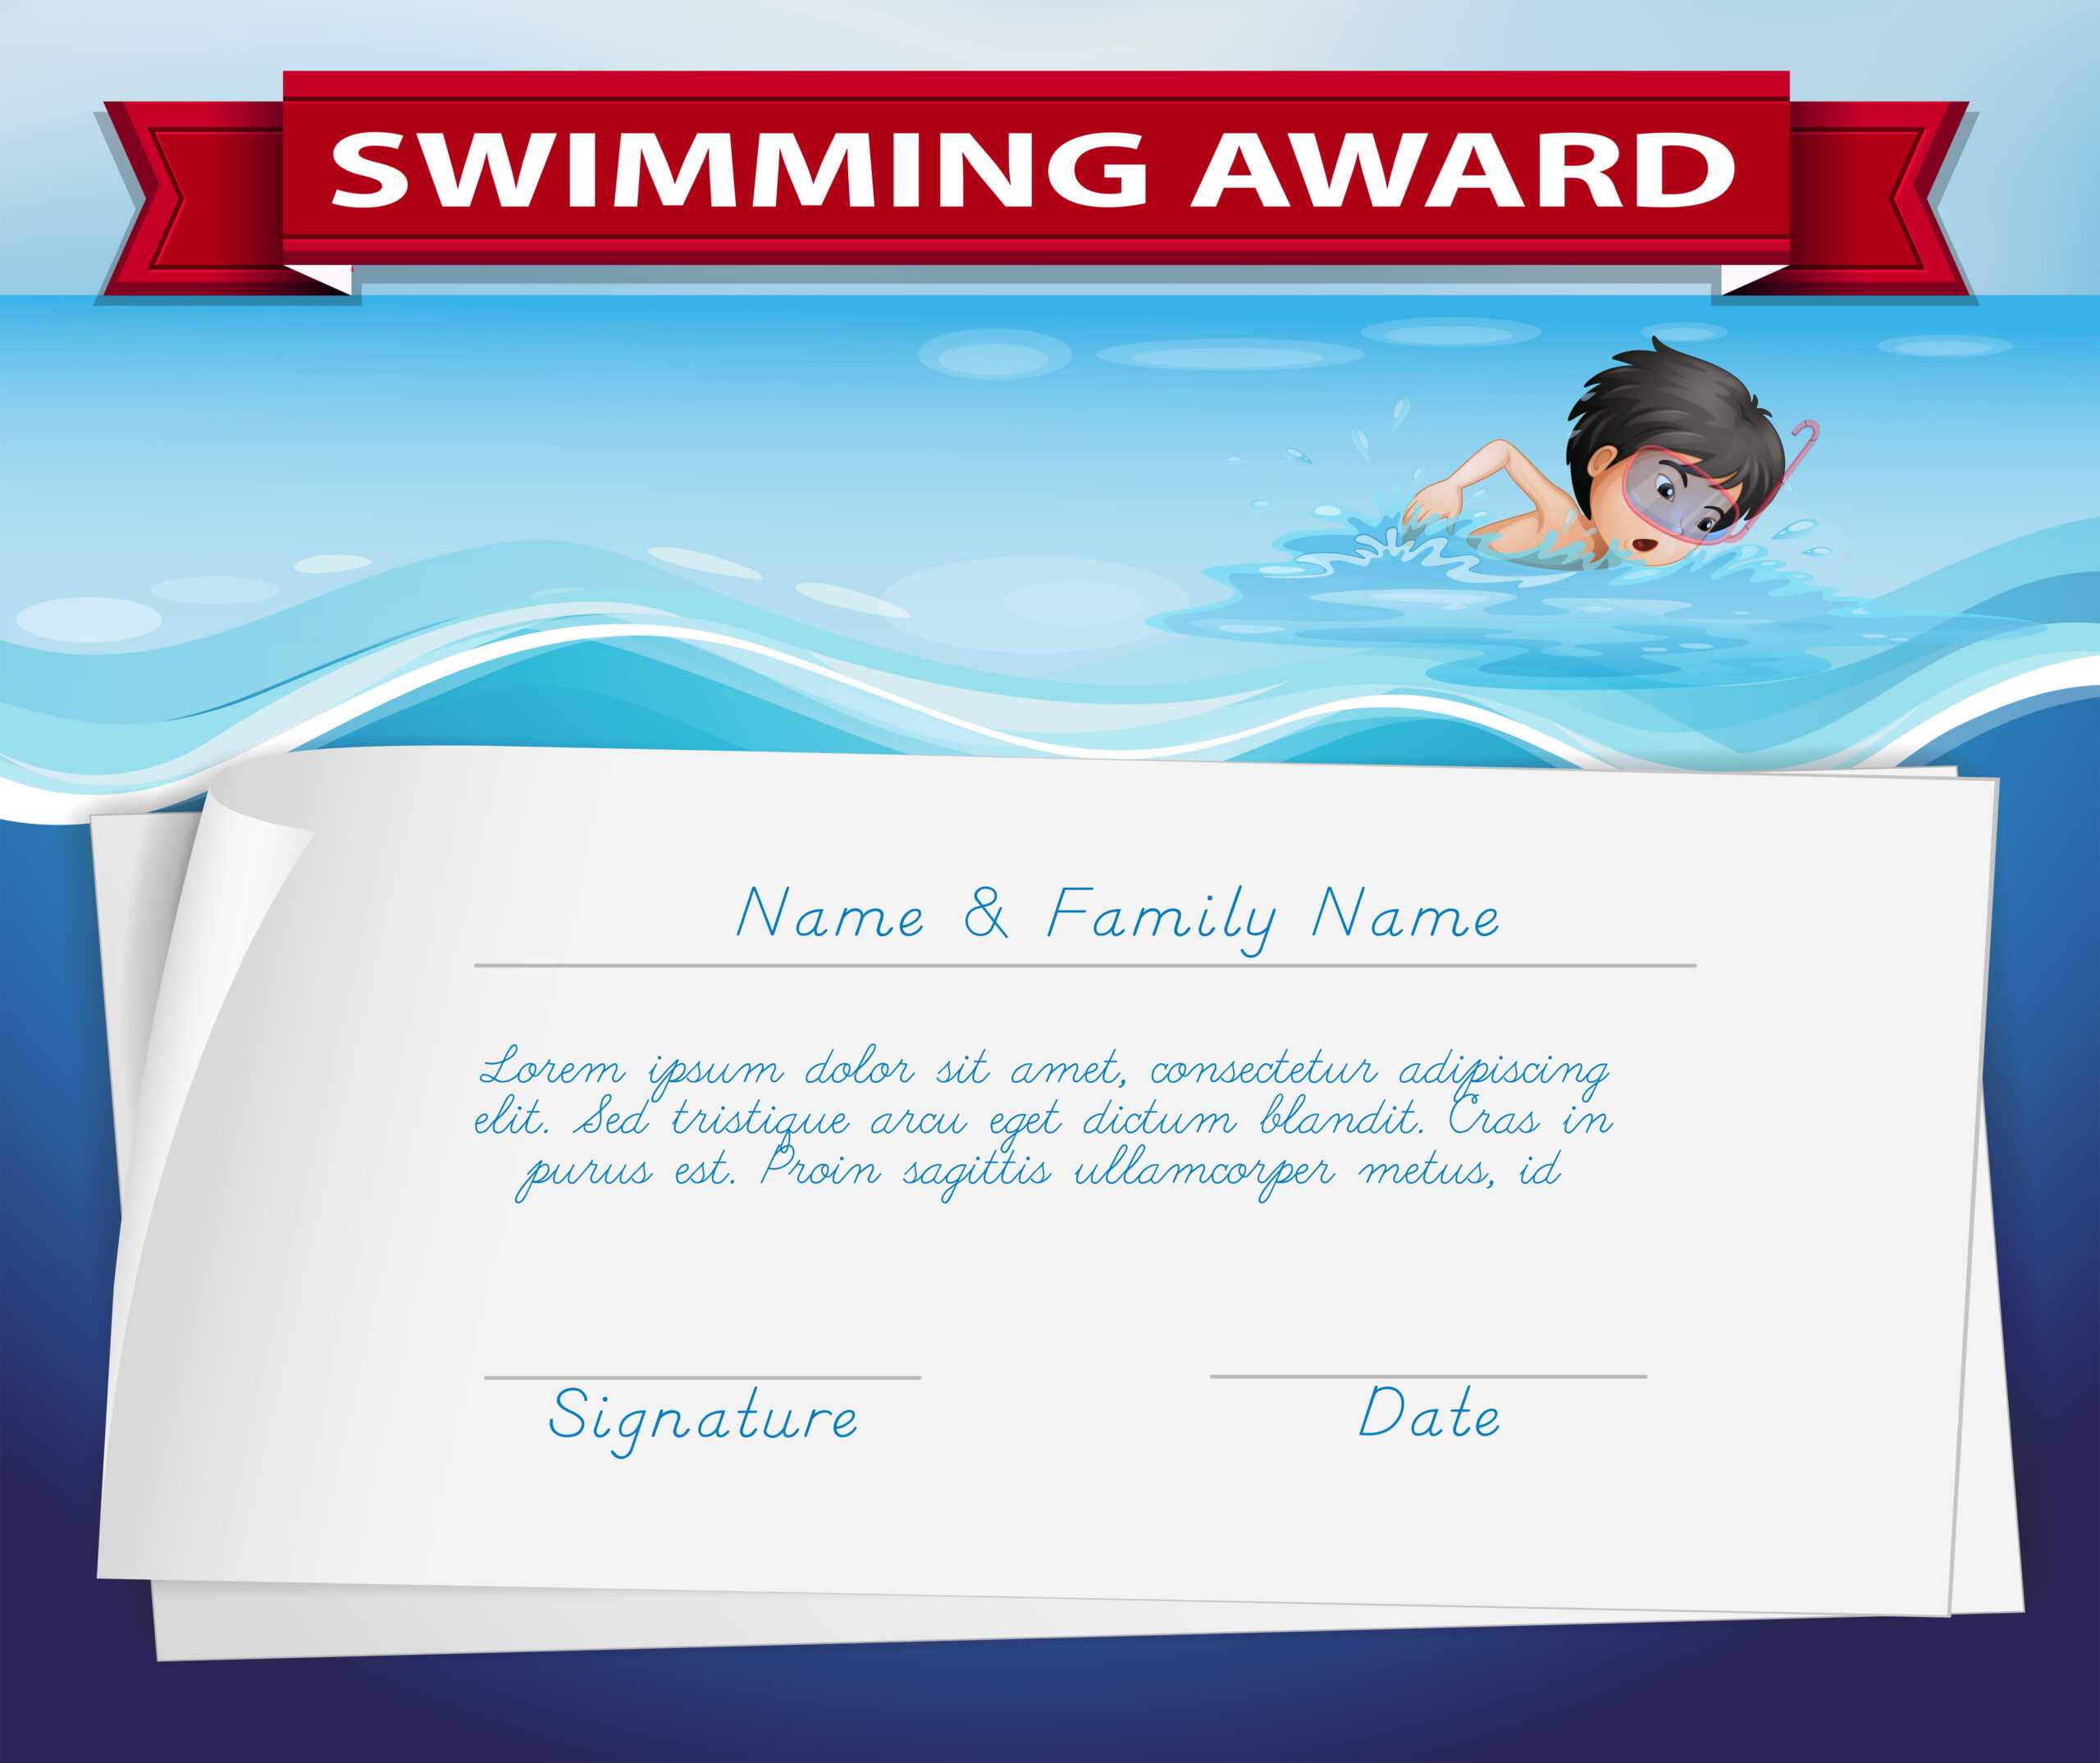 Template Of Certificate For Swimming Award – Download Free In Free Swimming Certificate Templates